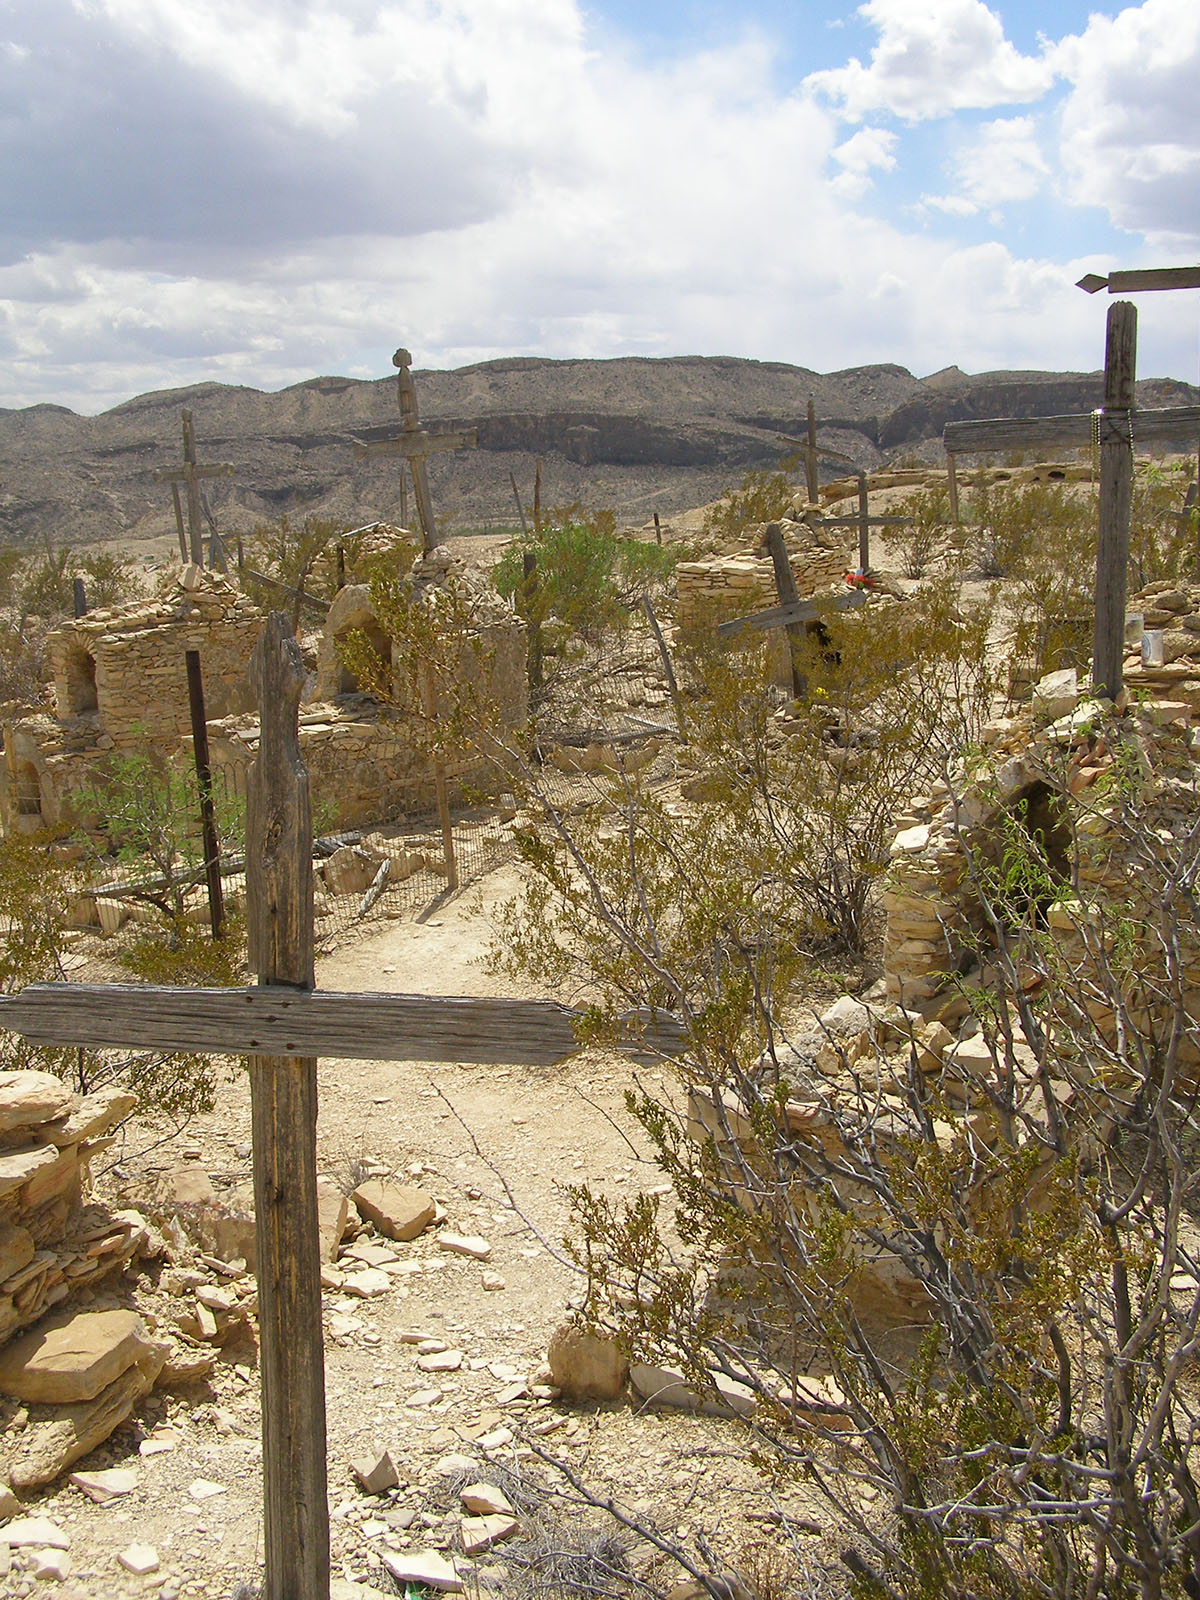 Another shot of the cemetery. Old, natural-color wooden crosses are prominent.